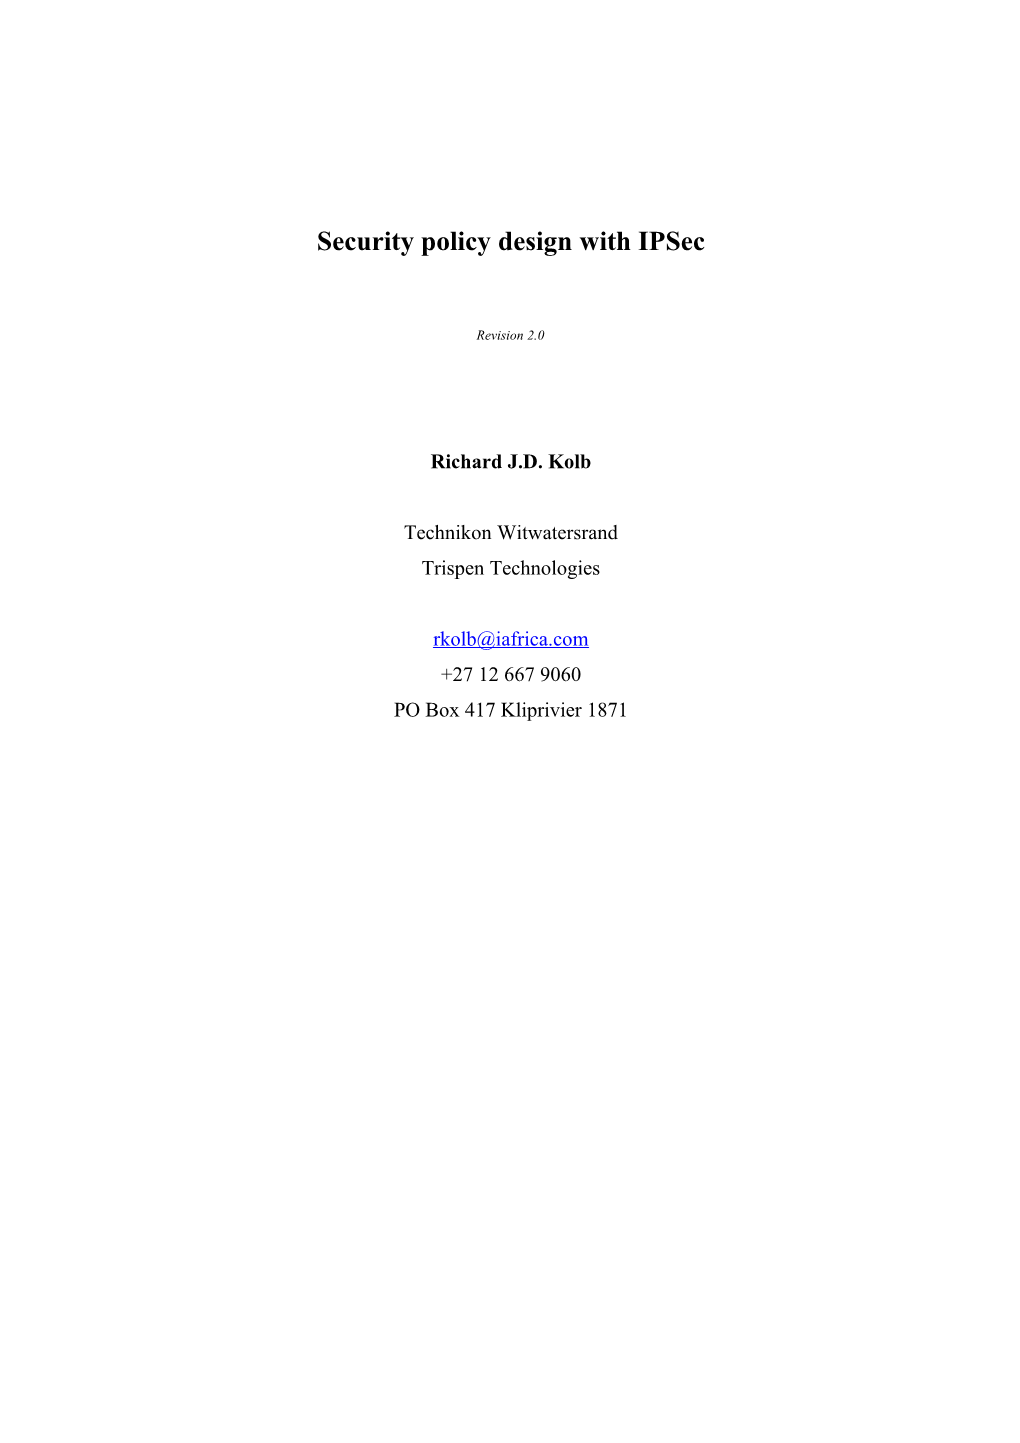 Security Policy Design with Ipsec